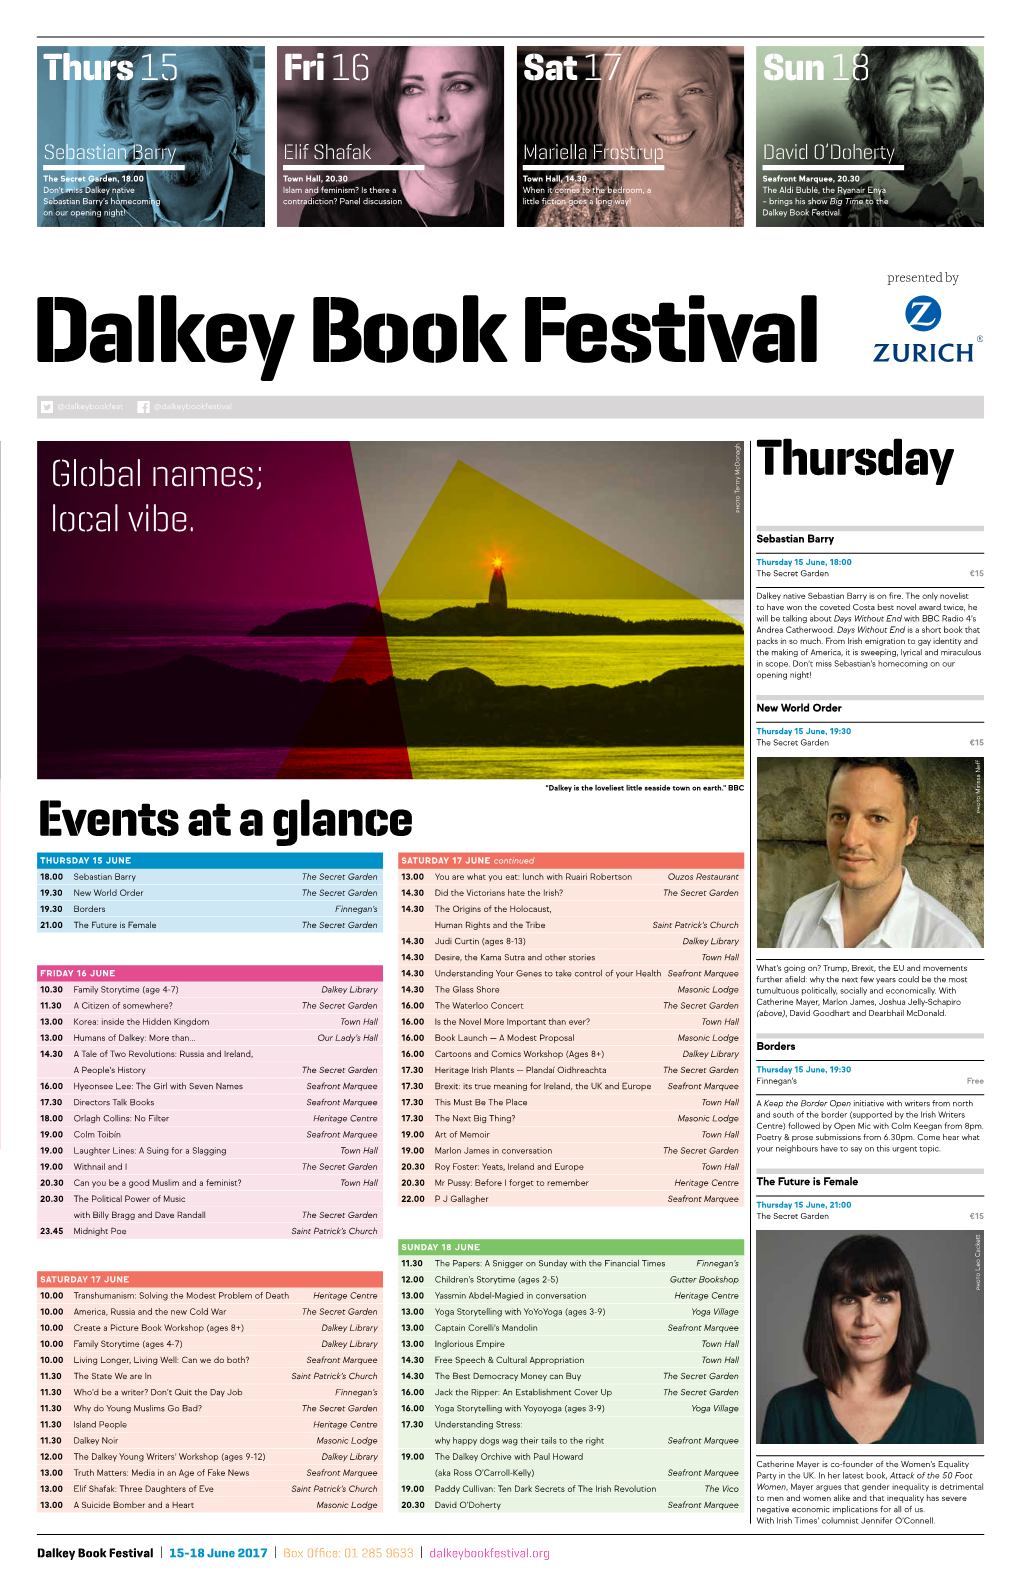 Thursday Events at a Glance